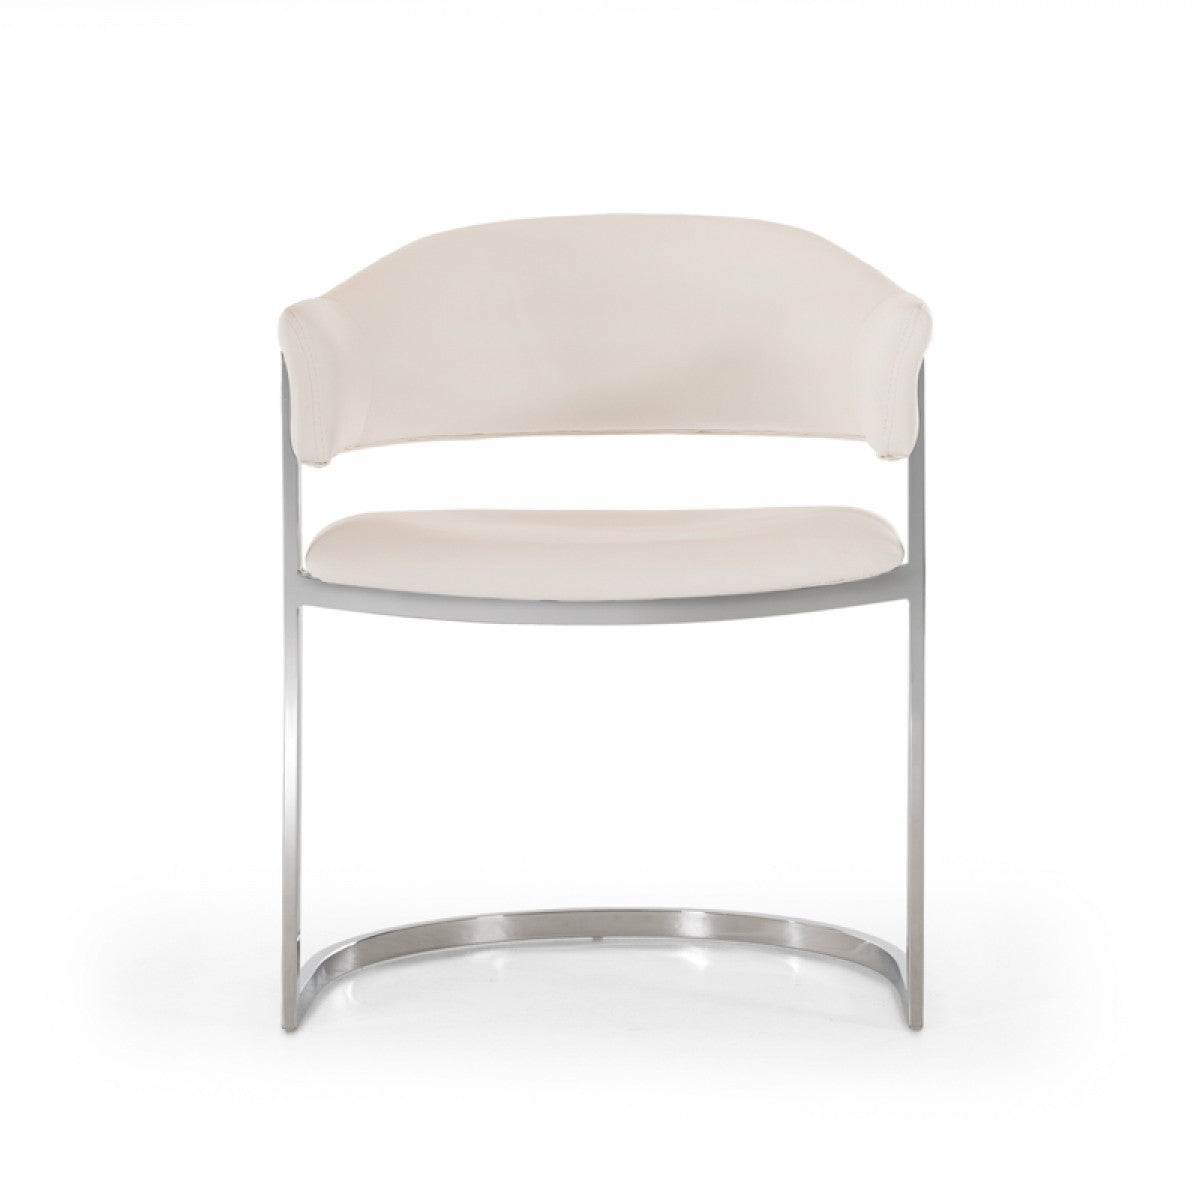 Modrest Allie Contemporary Leatherette Dining Chair